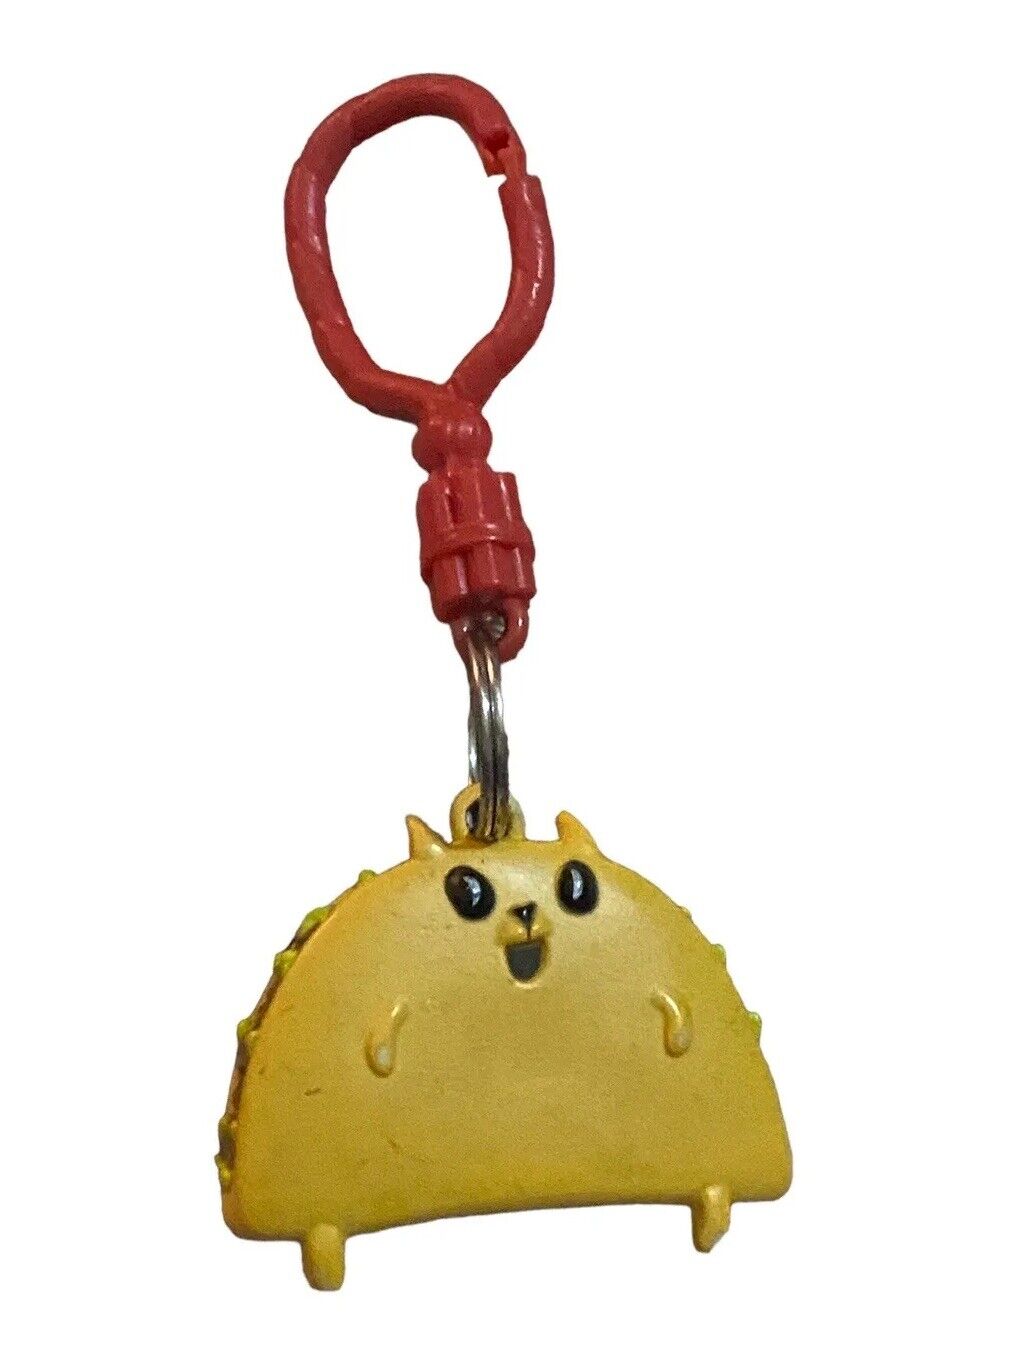 Exploding Kittens Taco Cat Keychain Key Bag Clip Figure Toy